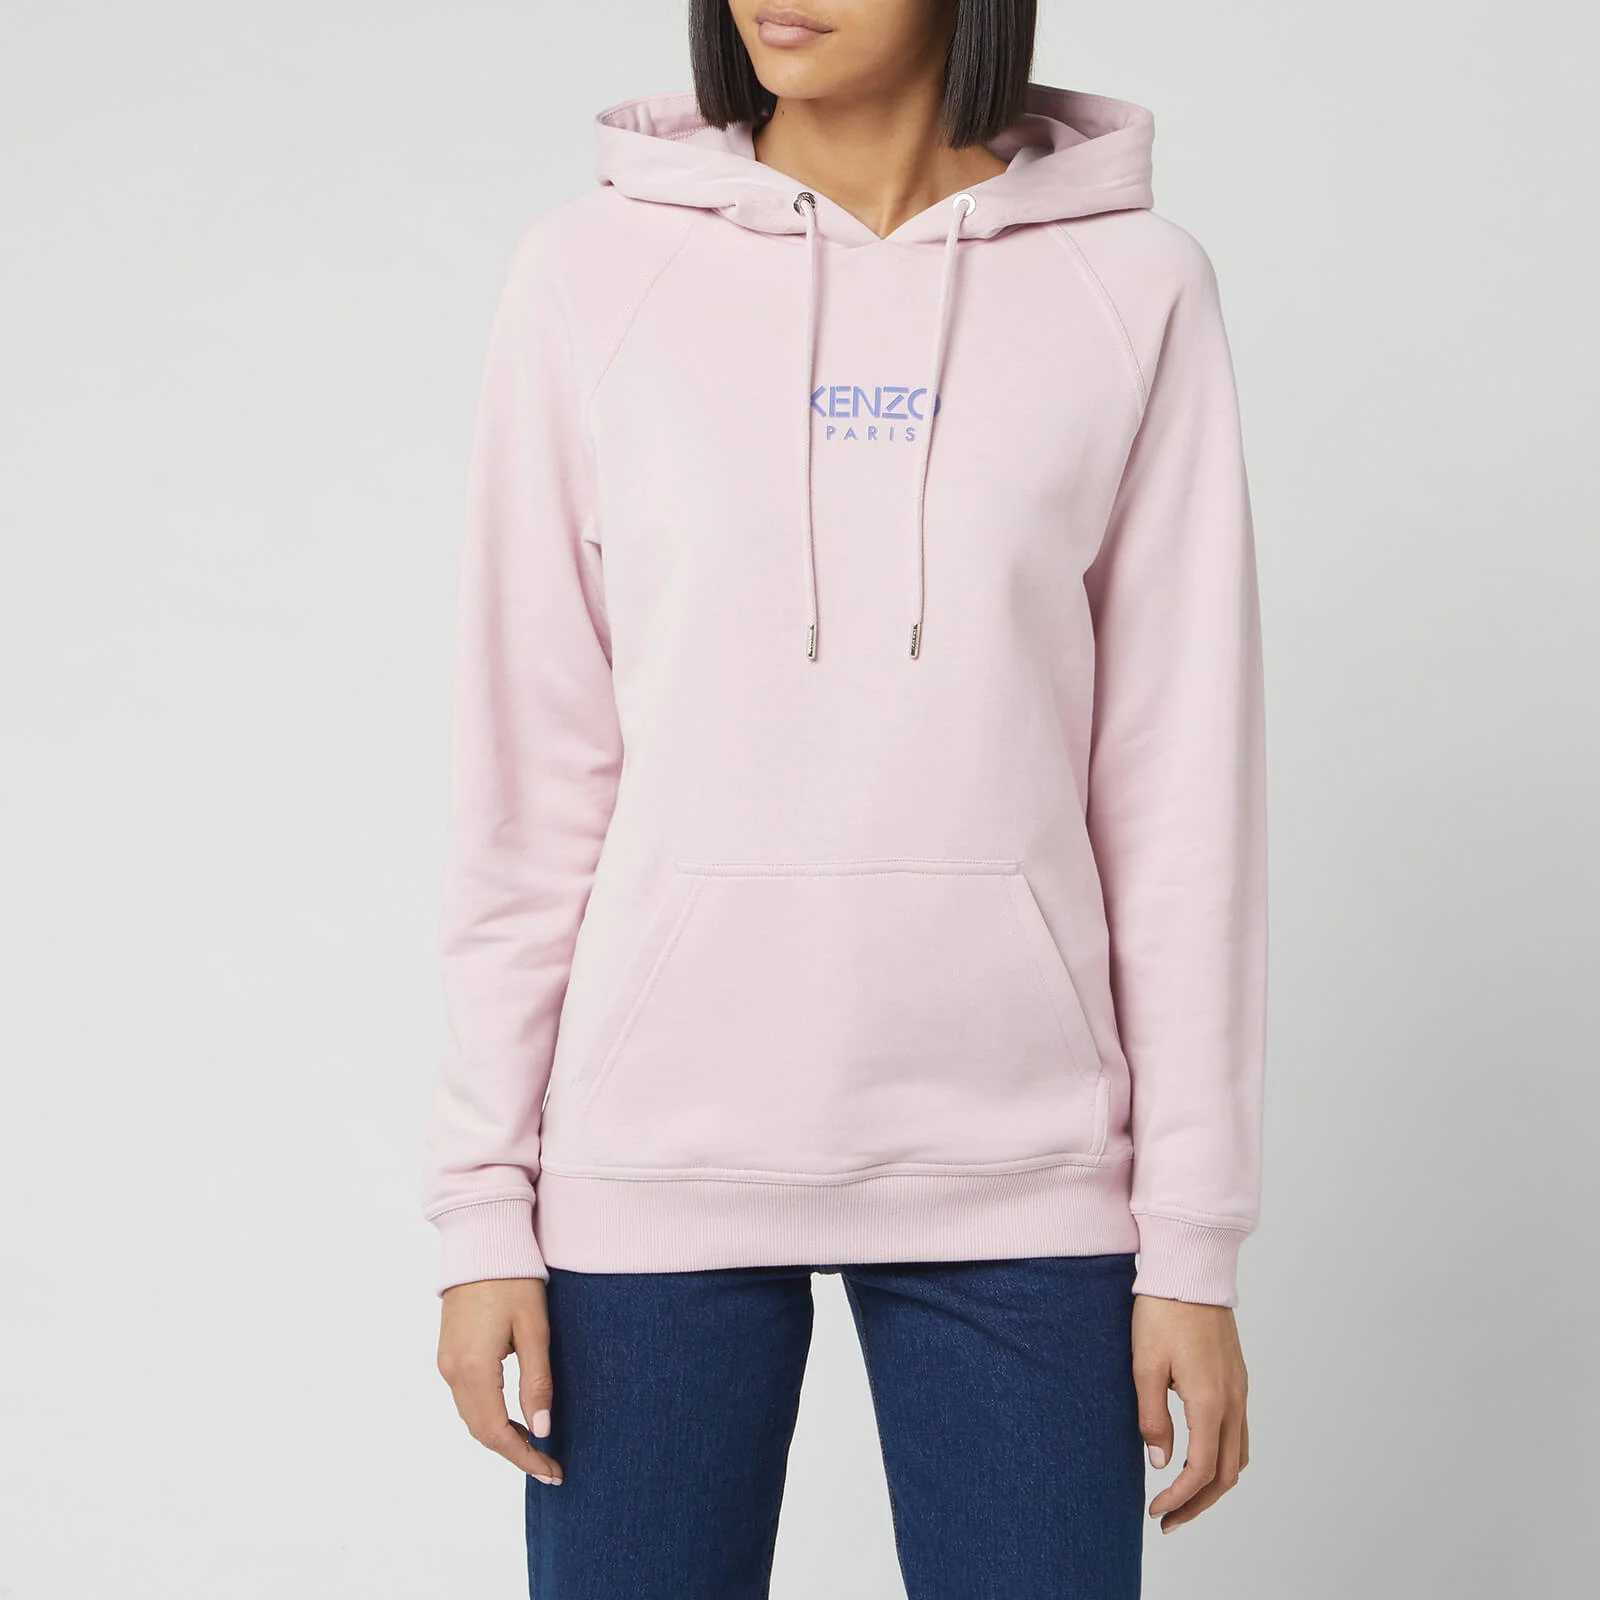 KENZO Women's Essential Classic Hoody - Faded Pink Image 1